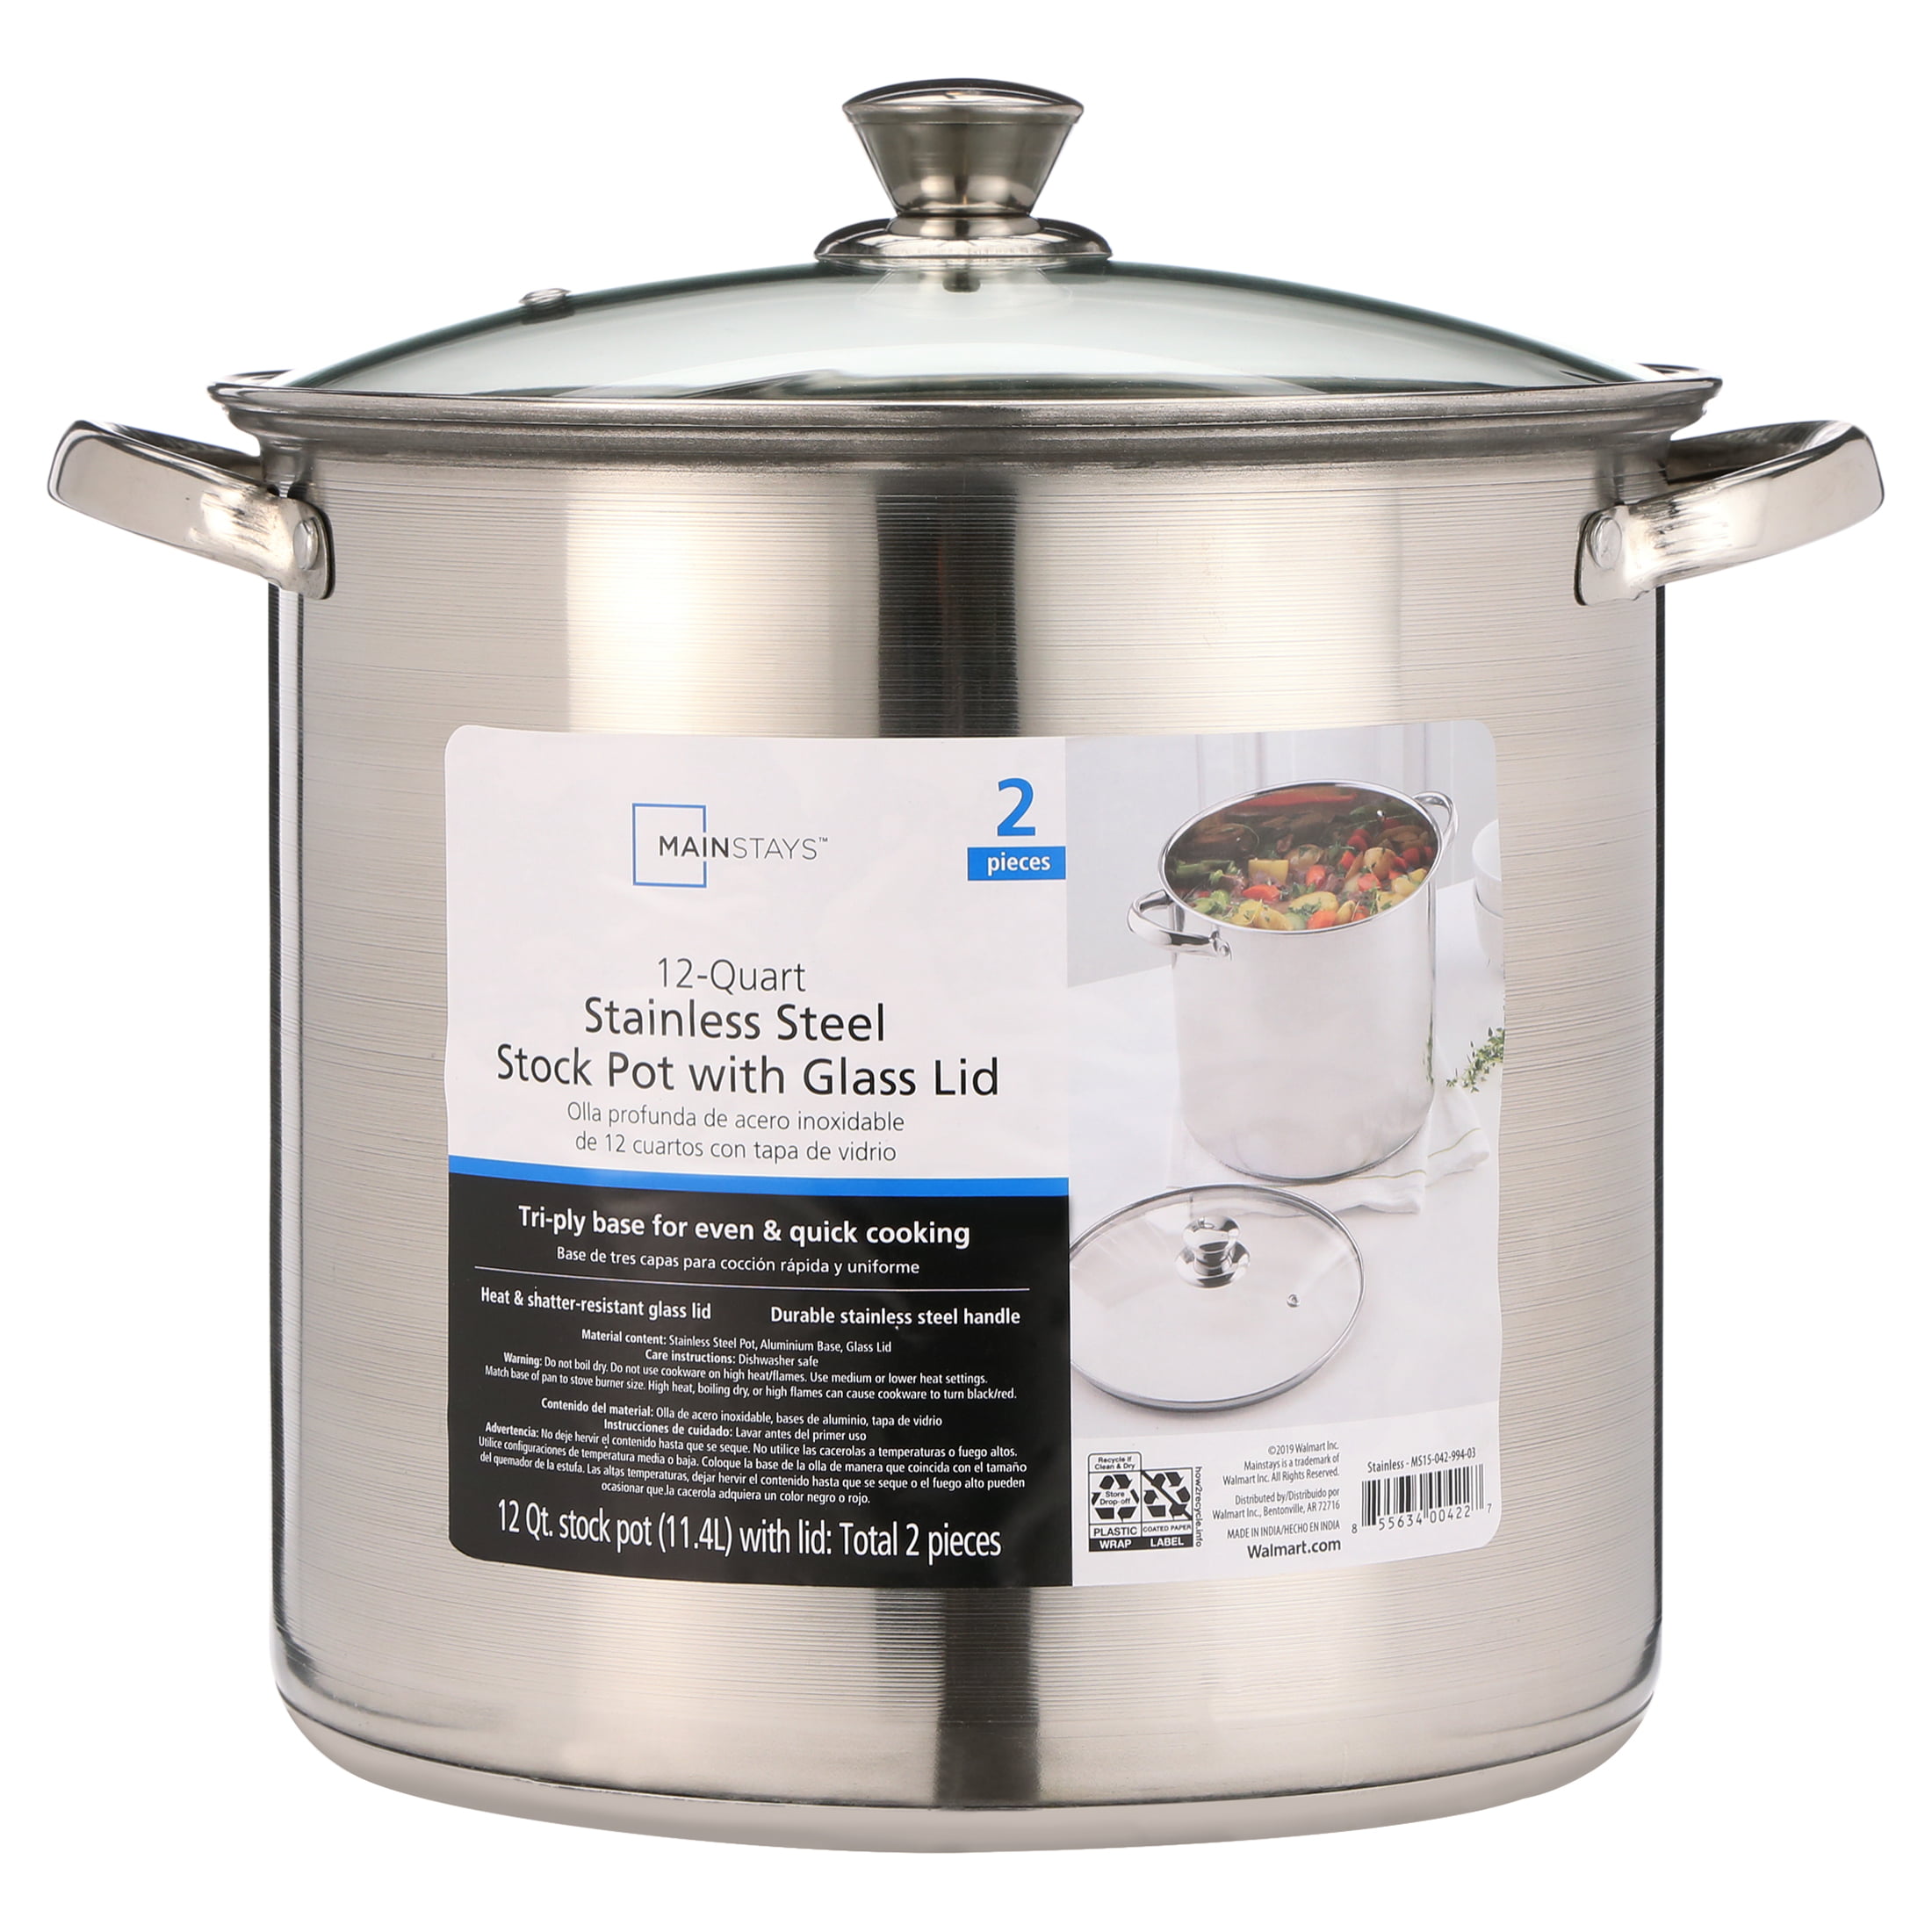 LIANYU 12 Quart Stock Pot with Lid, 18/10 12 QT Stainless Steel Soup Pot,  Tri-Ply Heavy Duty large Canning Pasta Pot, Big Deep Pot for Cooking